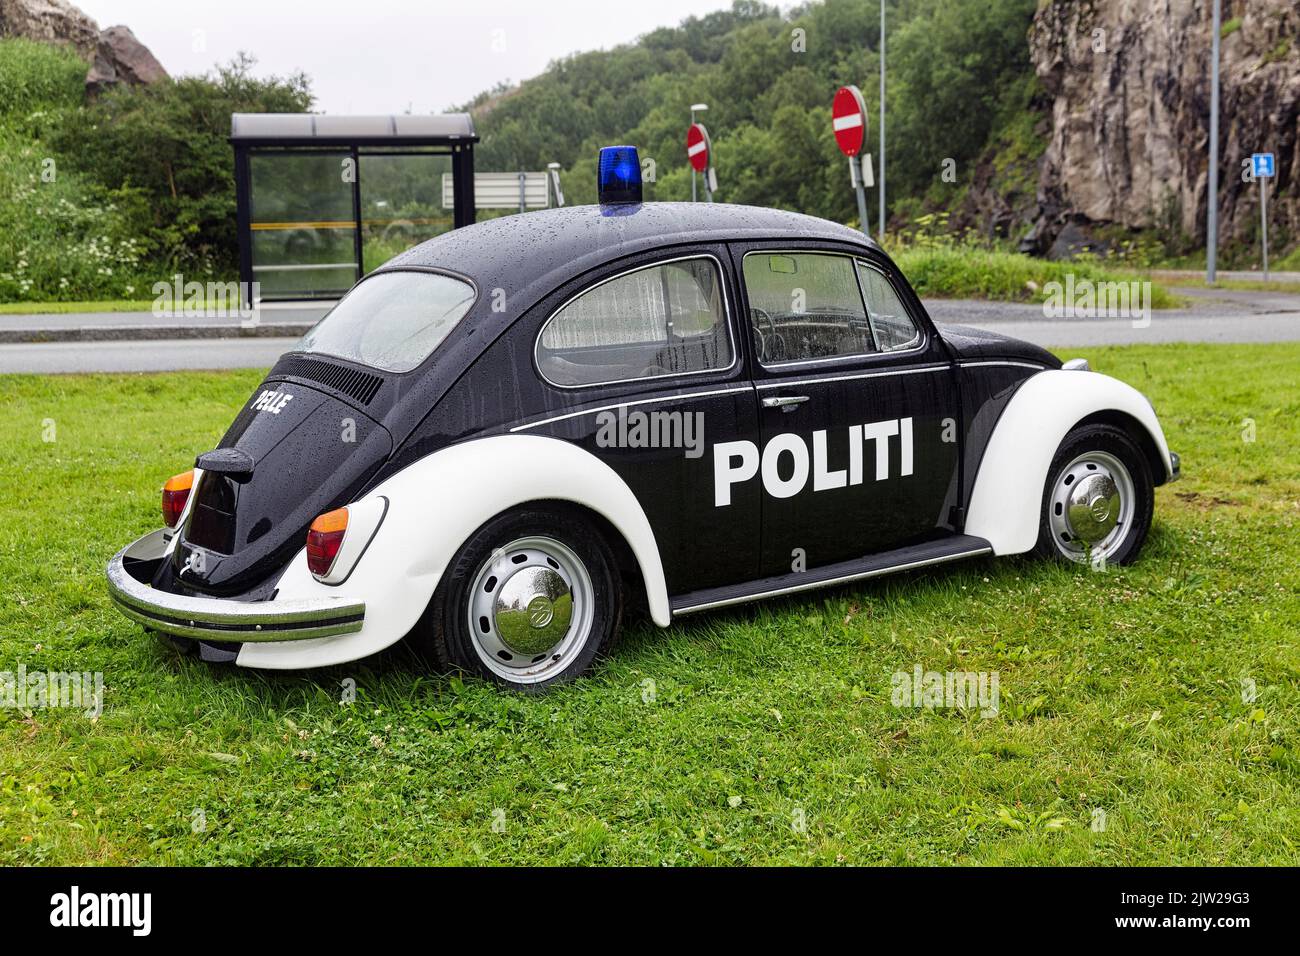 Black and white police patrol car with lettering Politi, VW Beetle, classic car from 1965 with blue light, standing in a meadow, Bodo, Bodo Stock Photo